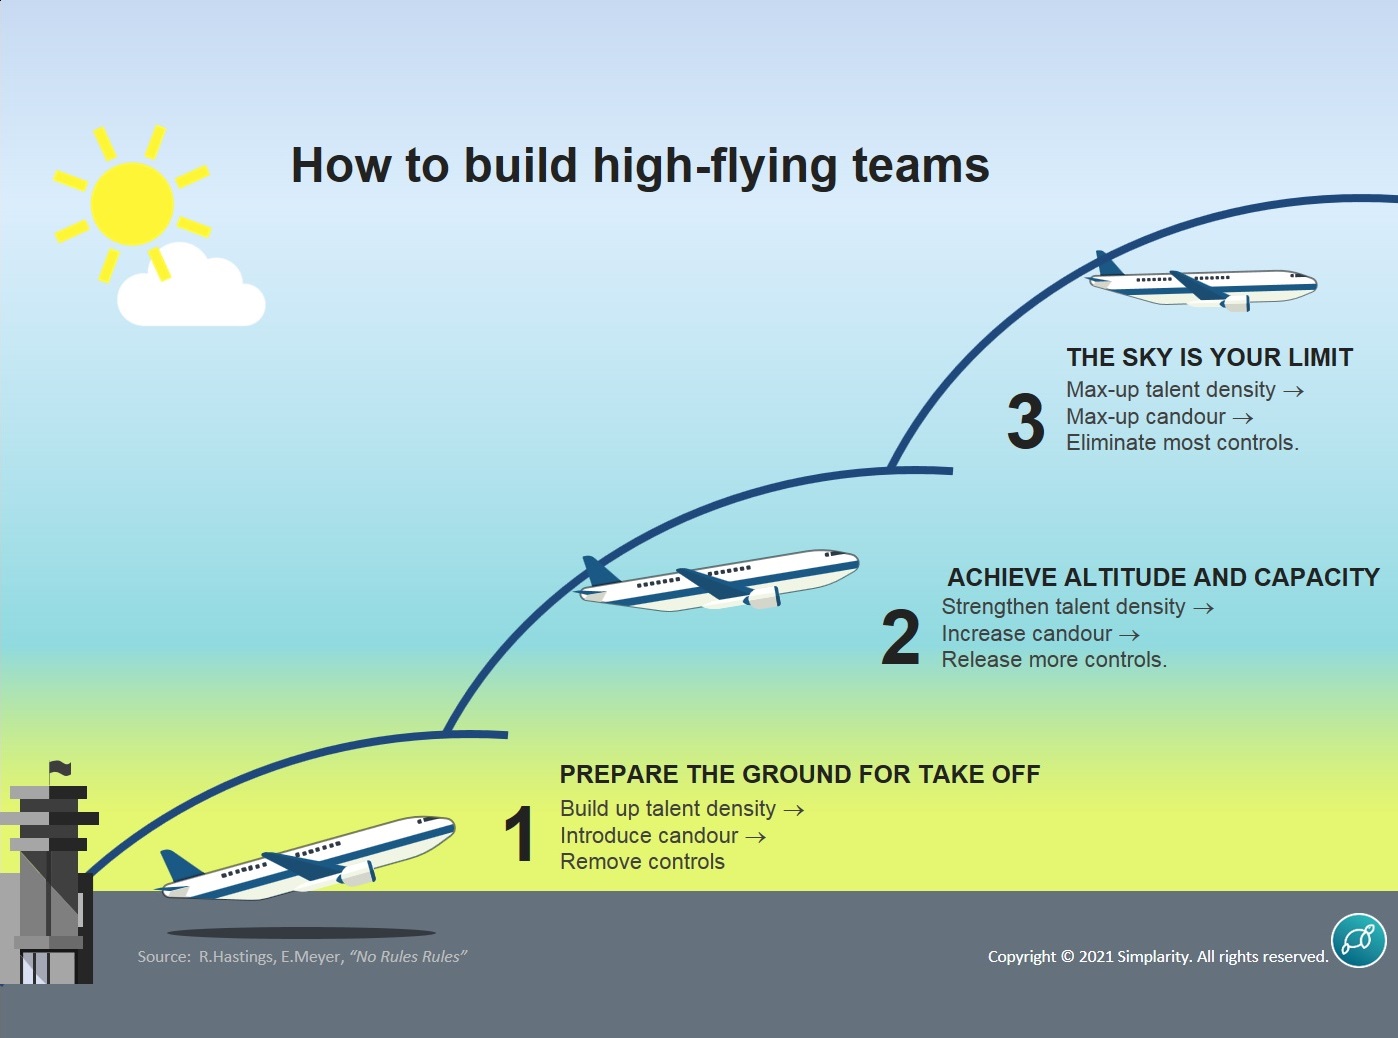 How to build high performance teams